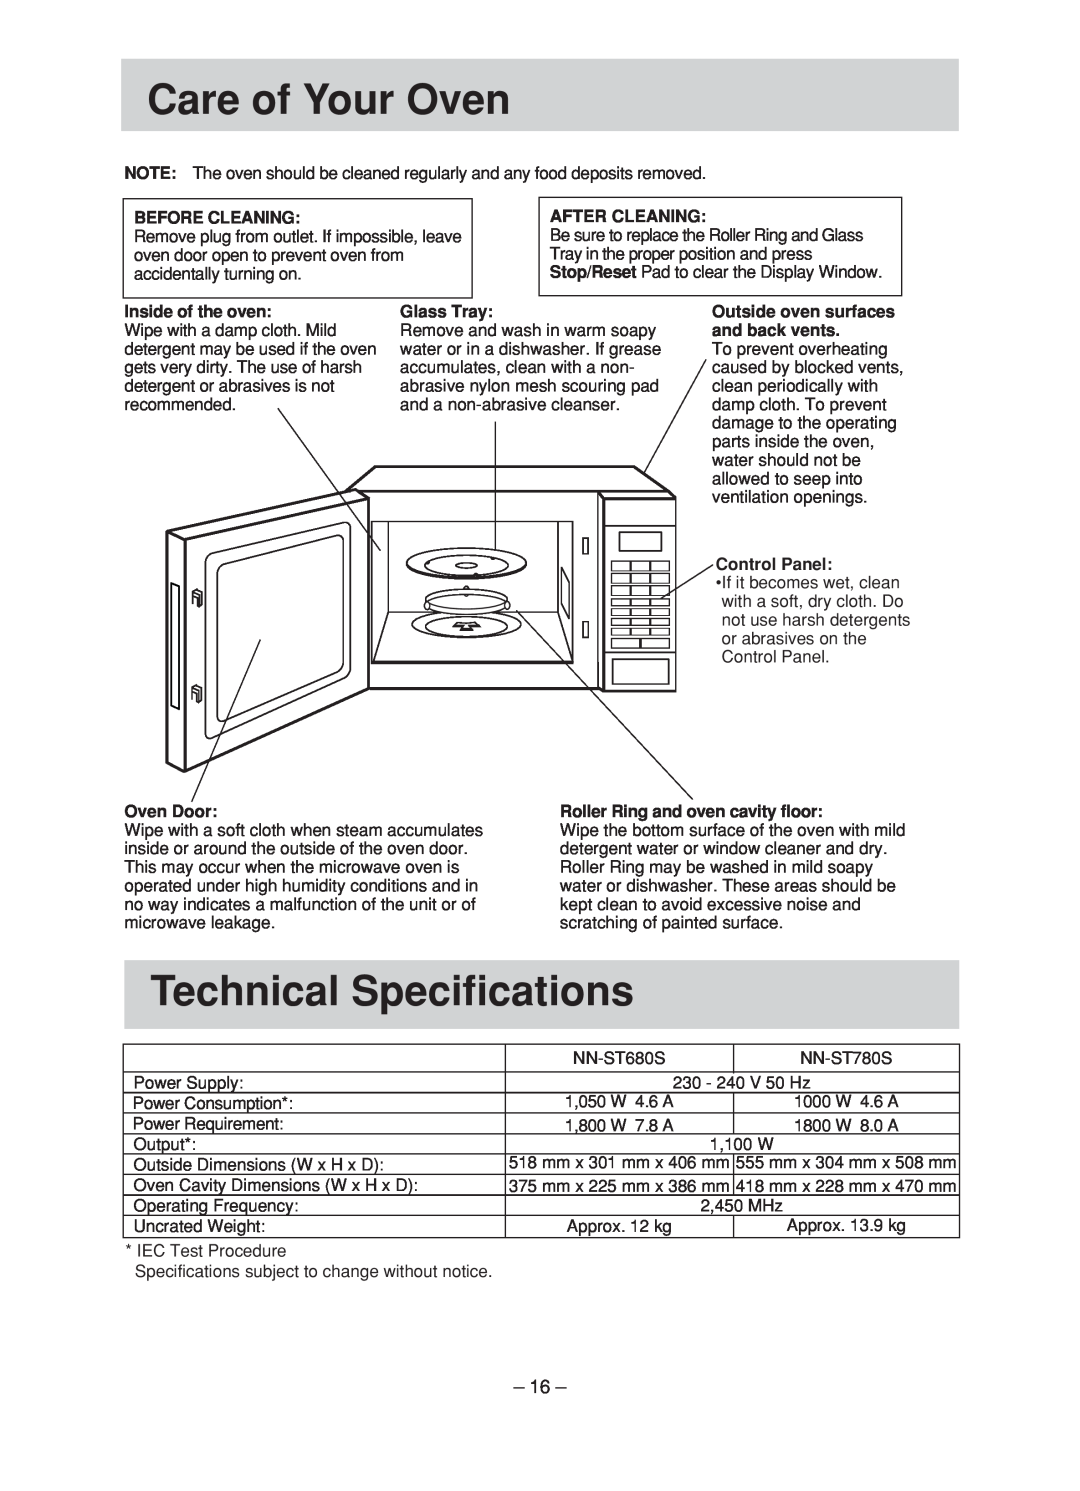 Panasonic NN-ST780S manual Care of Your Oven, Technical Specifications, Before Cleaning, After Cleaning, Inside of the oven 